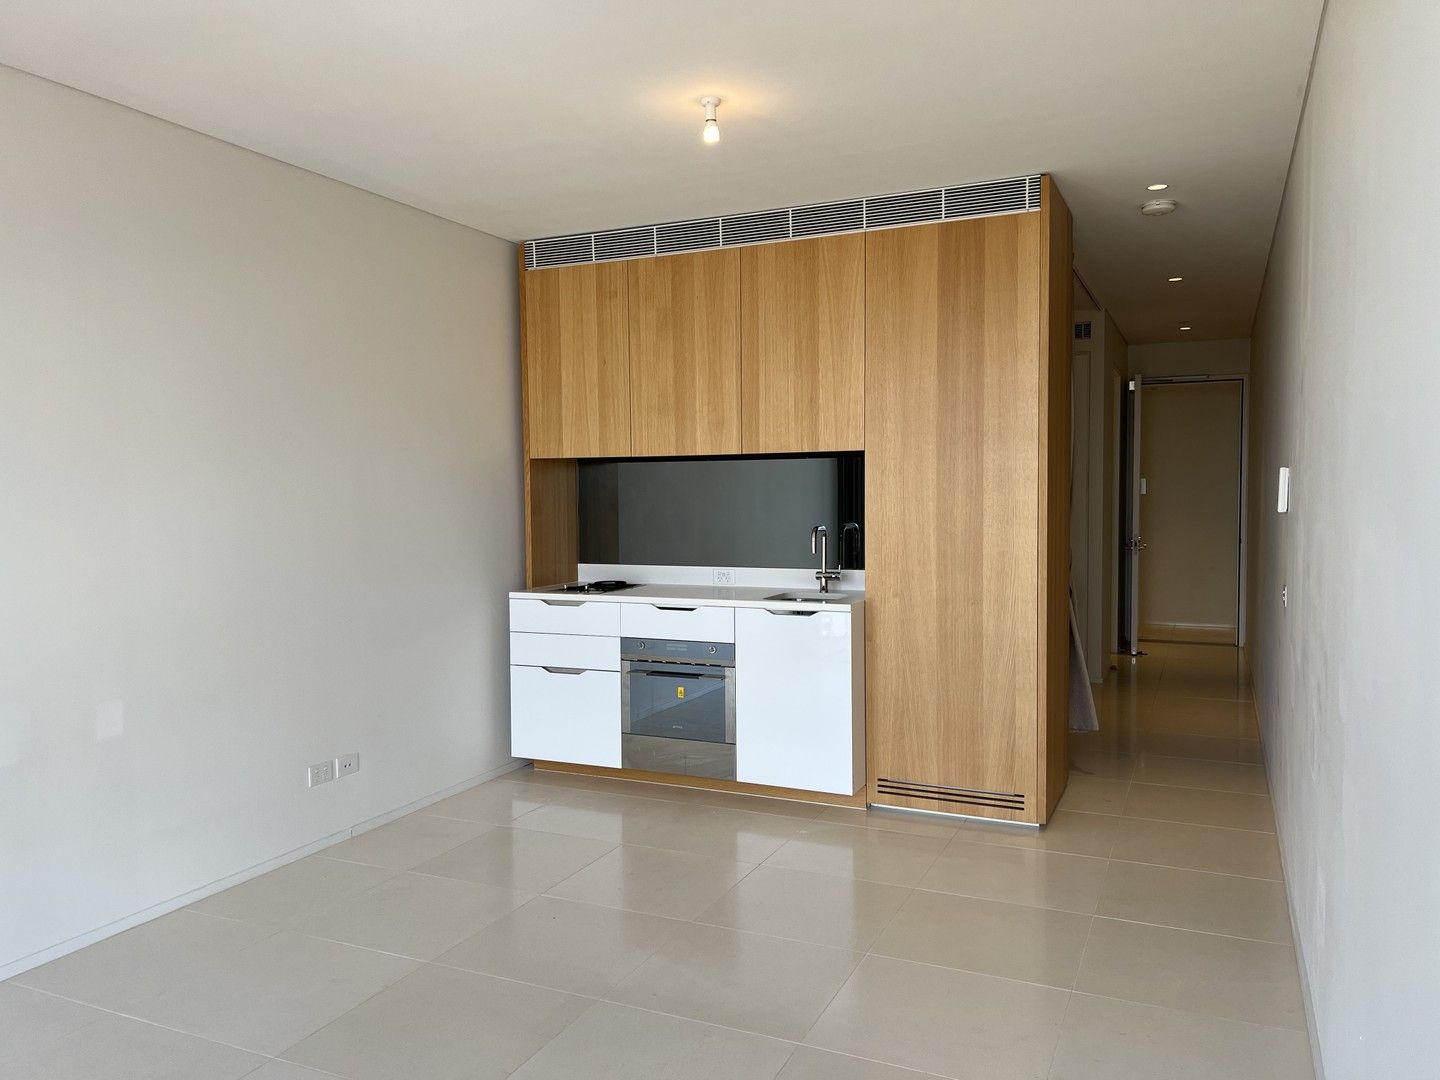 1 bedrooms Apartment / Unit / Flat in 18 Park Lane CHIPPENDALE NSW, 2008